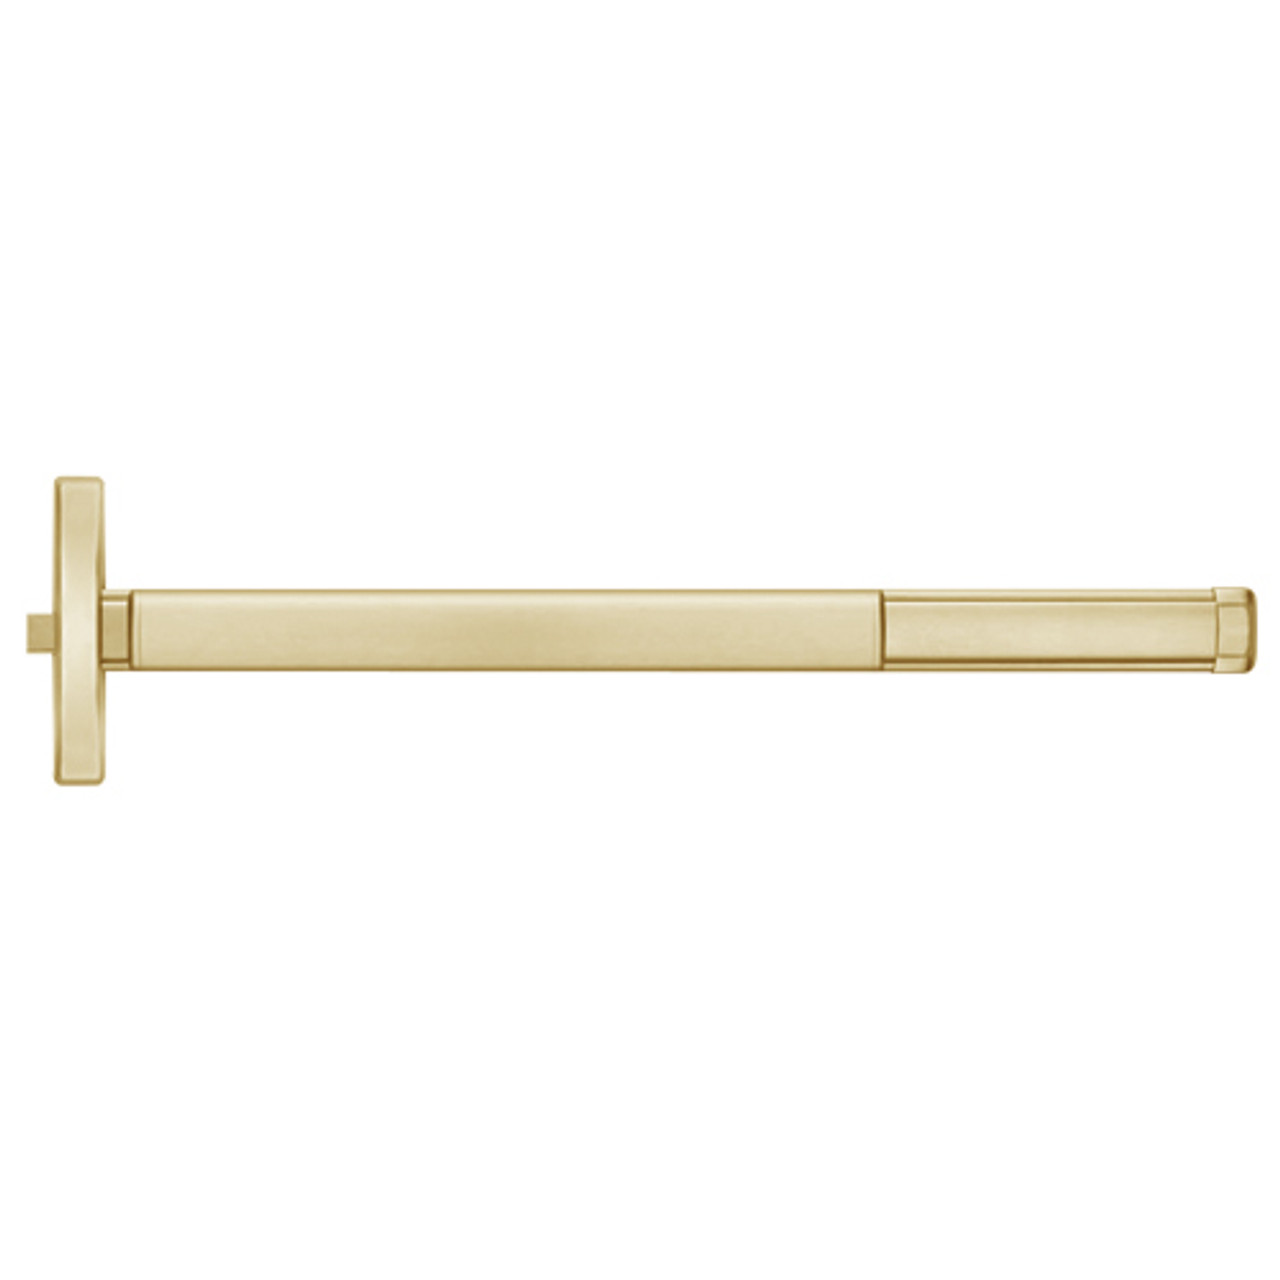 DE2402-606-36 PHI 2400 Series Non Fire Rated Apex Rim Exit Device with Delayed Egress Prepped for Dummy Trim in Satin Brass Finish